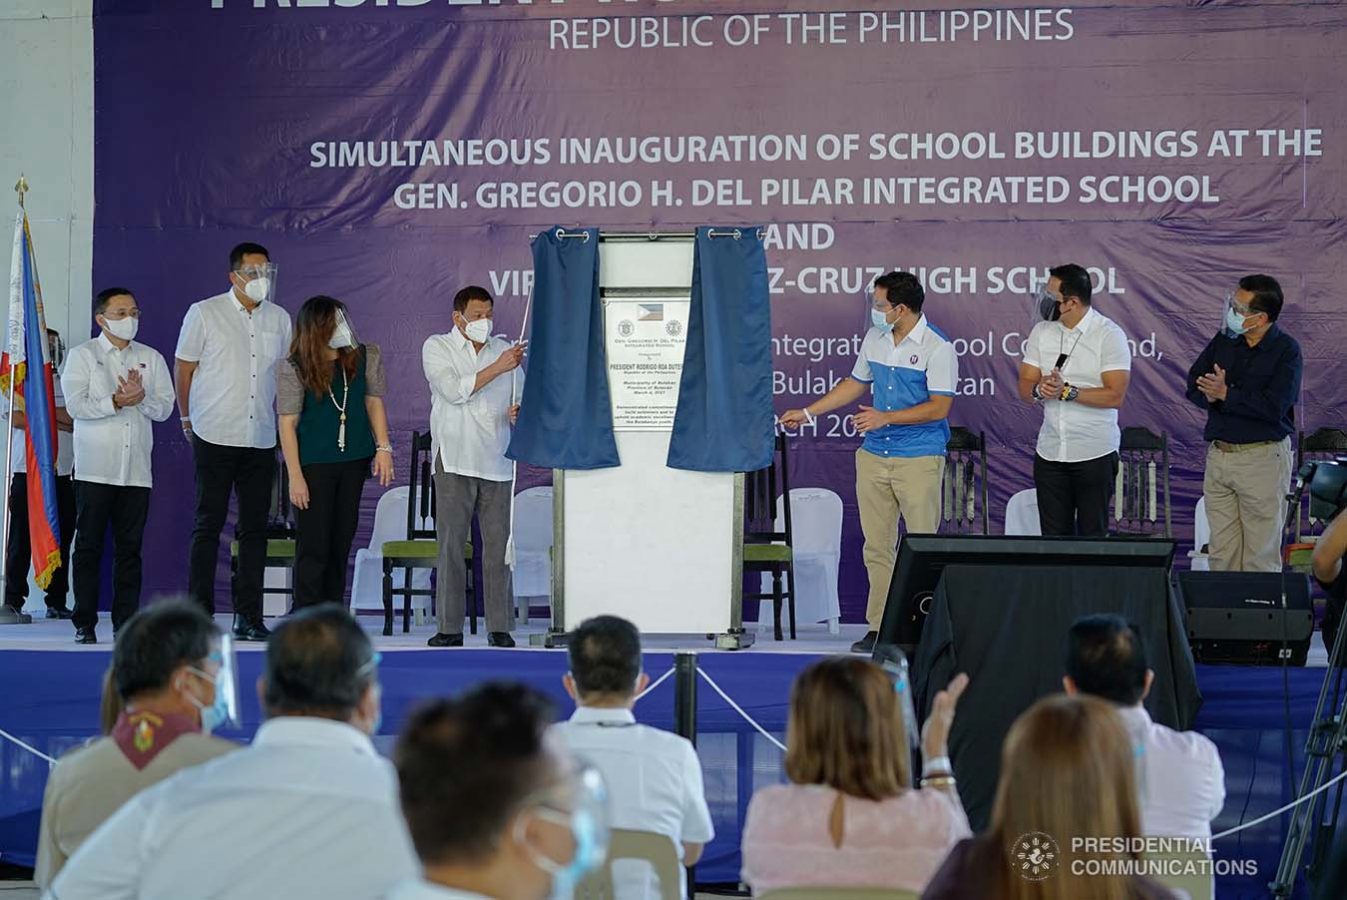 President Rodrigo Roa Duterte, assisted by DWPH Secretary Mark Villar and Bulacan Governor Daniel Fernando, leads the unveiling of marker of the newly constructed Gen. Gregorio H. Del Pilar Integrated School and Virginia Ramirez-Cruz High School buildings in Bulakan, Bulacan on March 4, 2021. Also present were Senator Christopher Lawrence Go, President Duterte's partner Honeylet Avanceña, and local officials of Bulacan province. KING RODRIGUEZ/ PRESIDENTIAL PHOTO